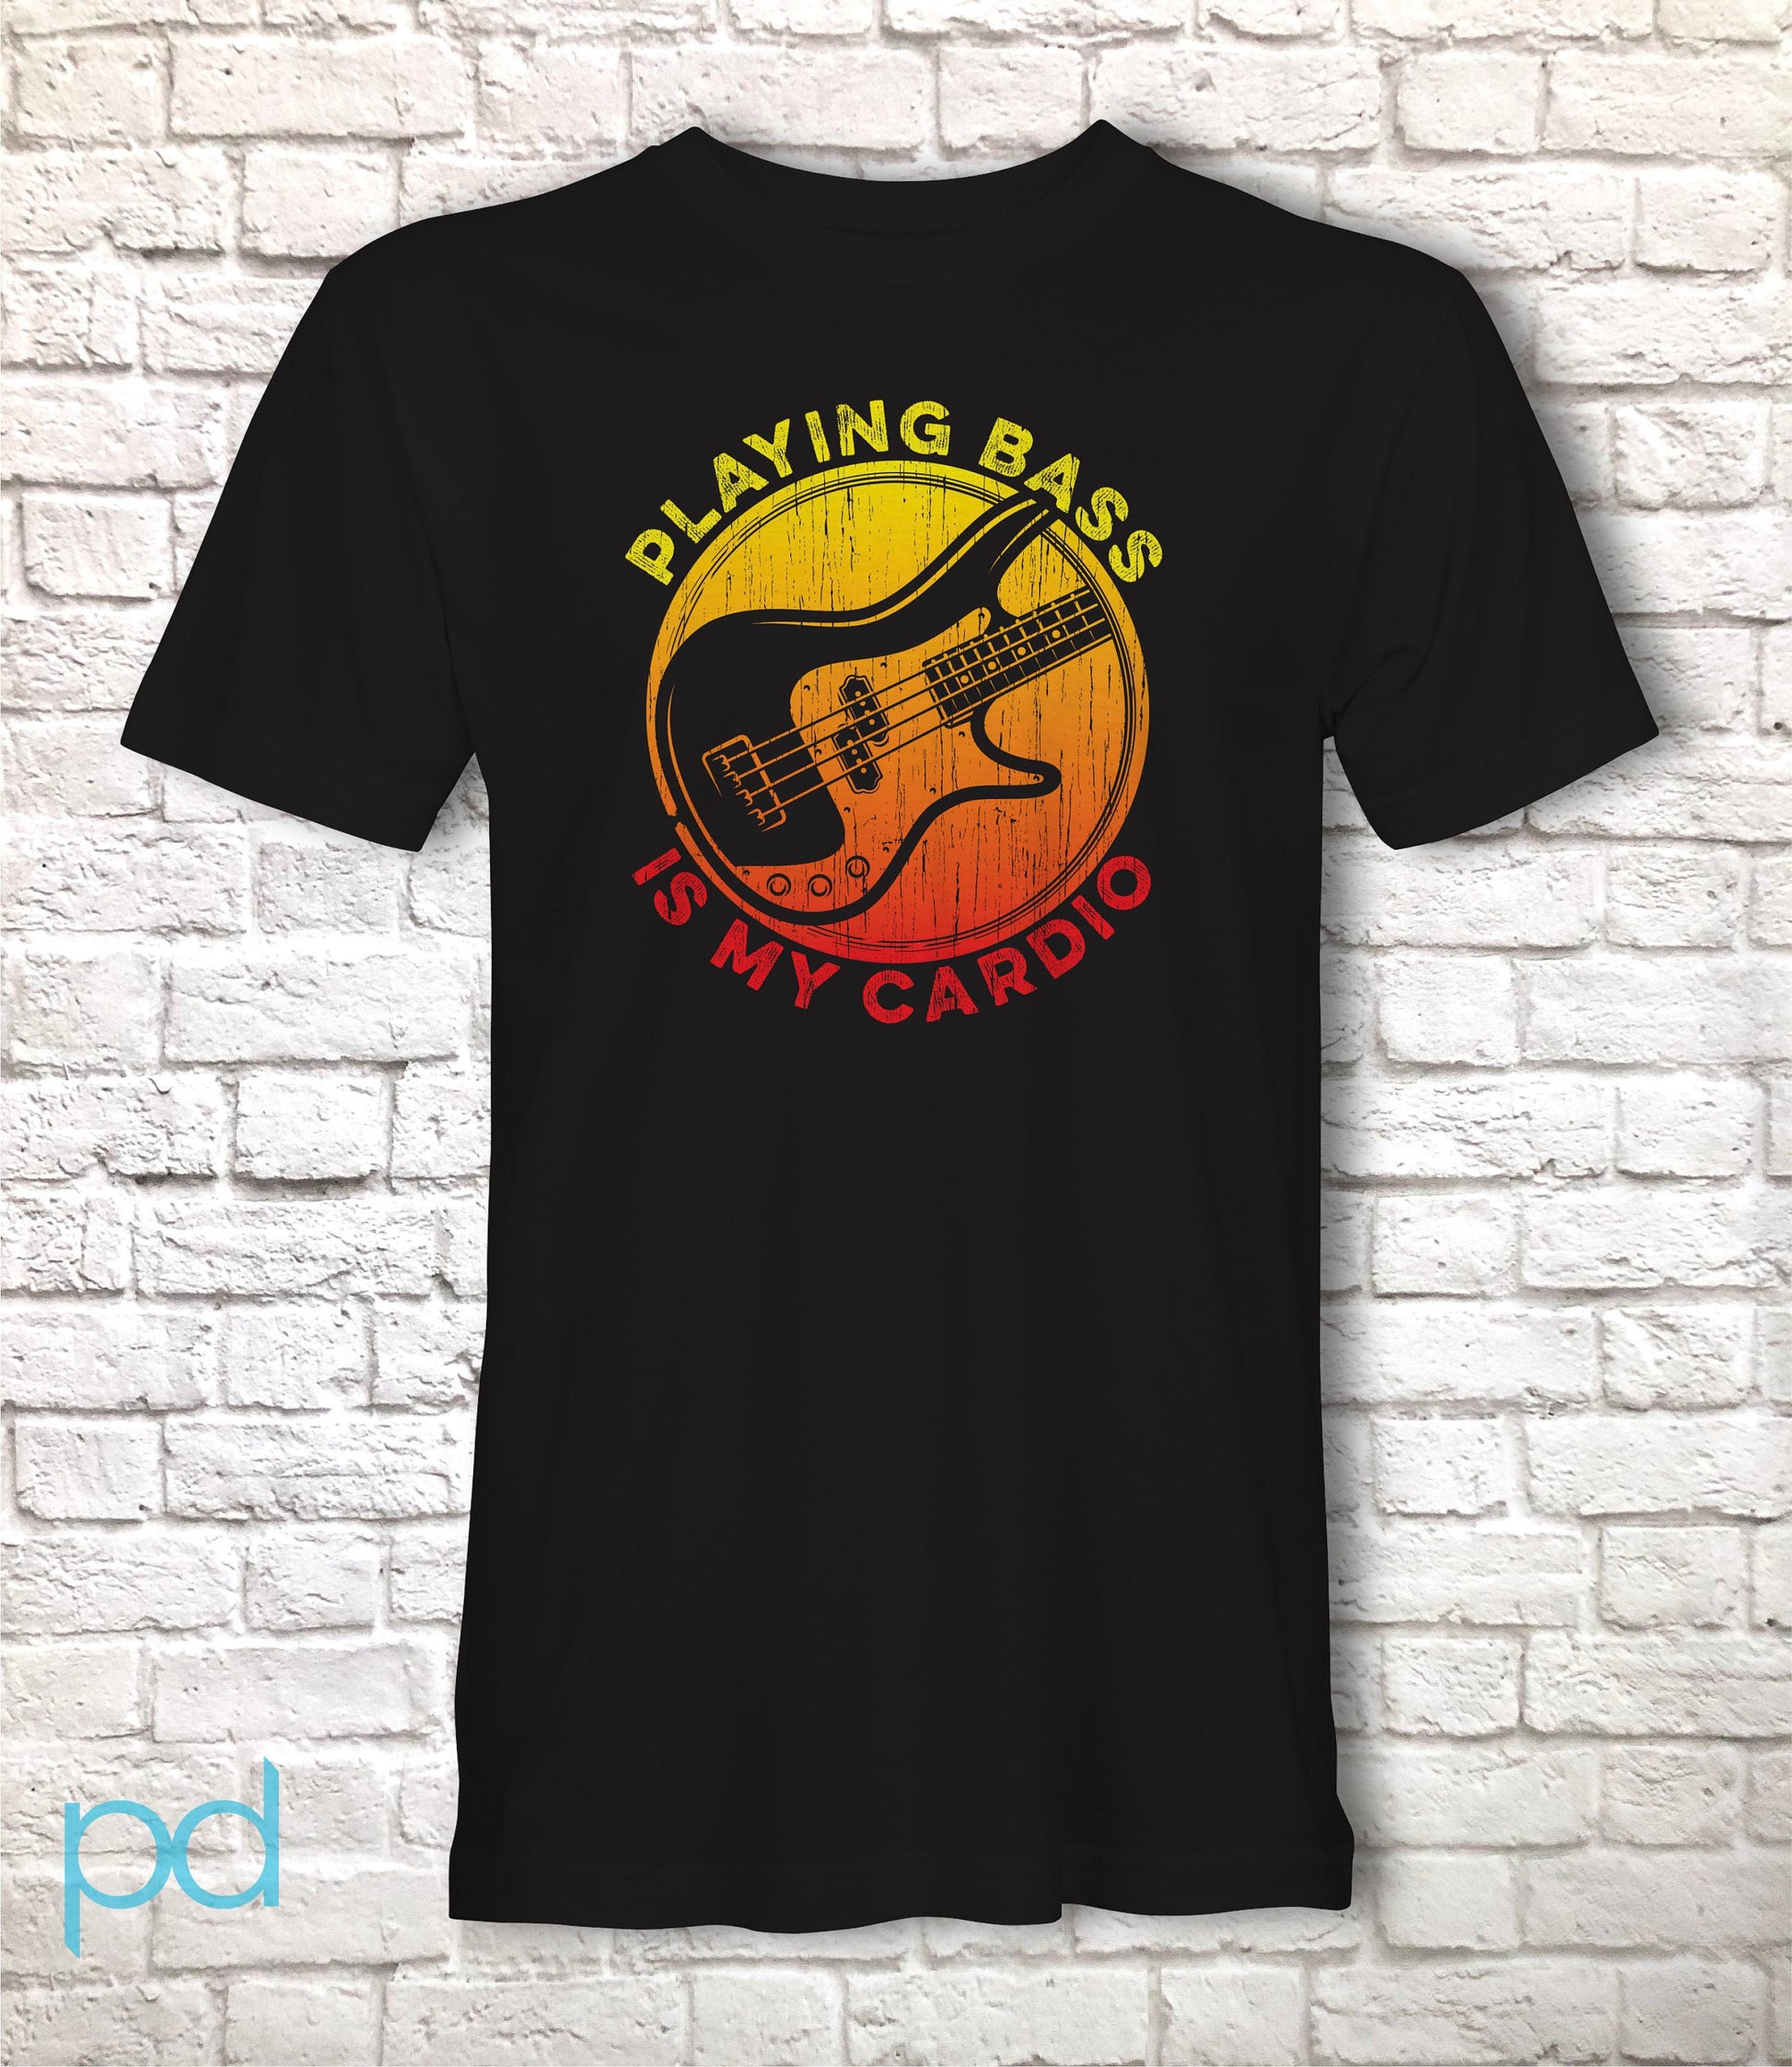 Funny Bass Player T Shirt Gift, Bassist Present Idea, Playing Bass Guitar Is My Cardio Tee Shirt T Top